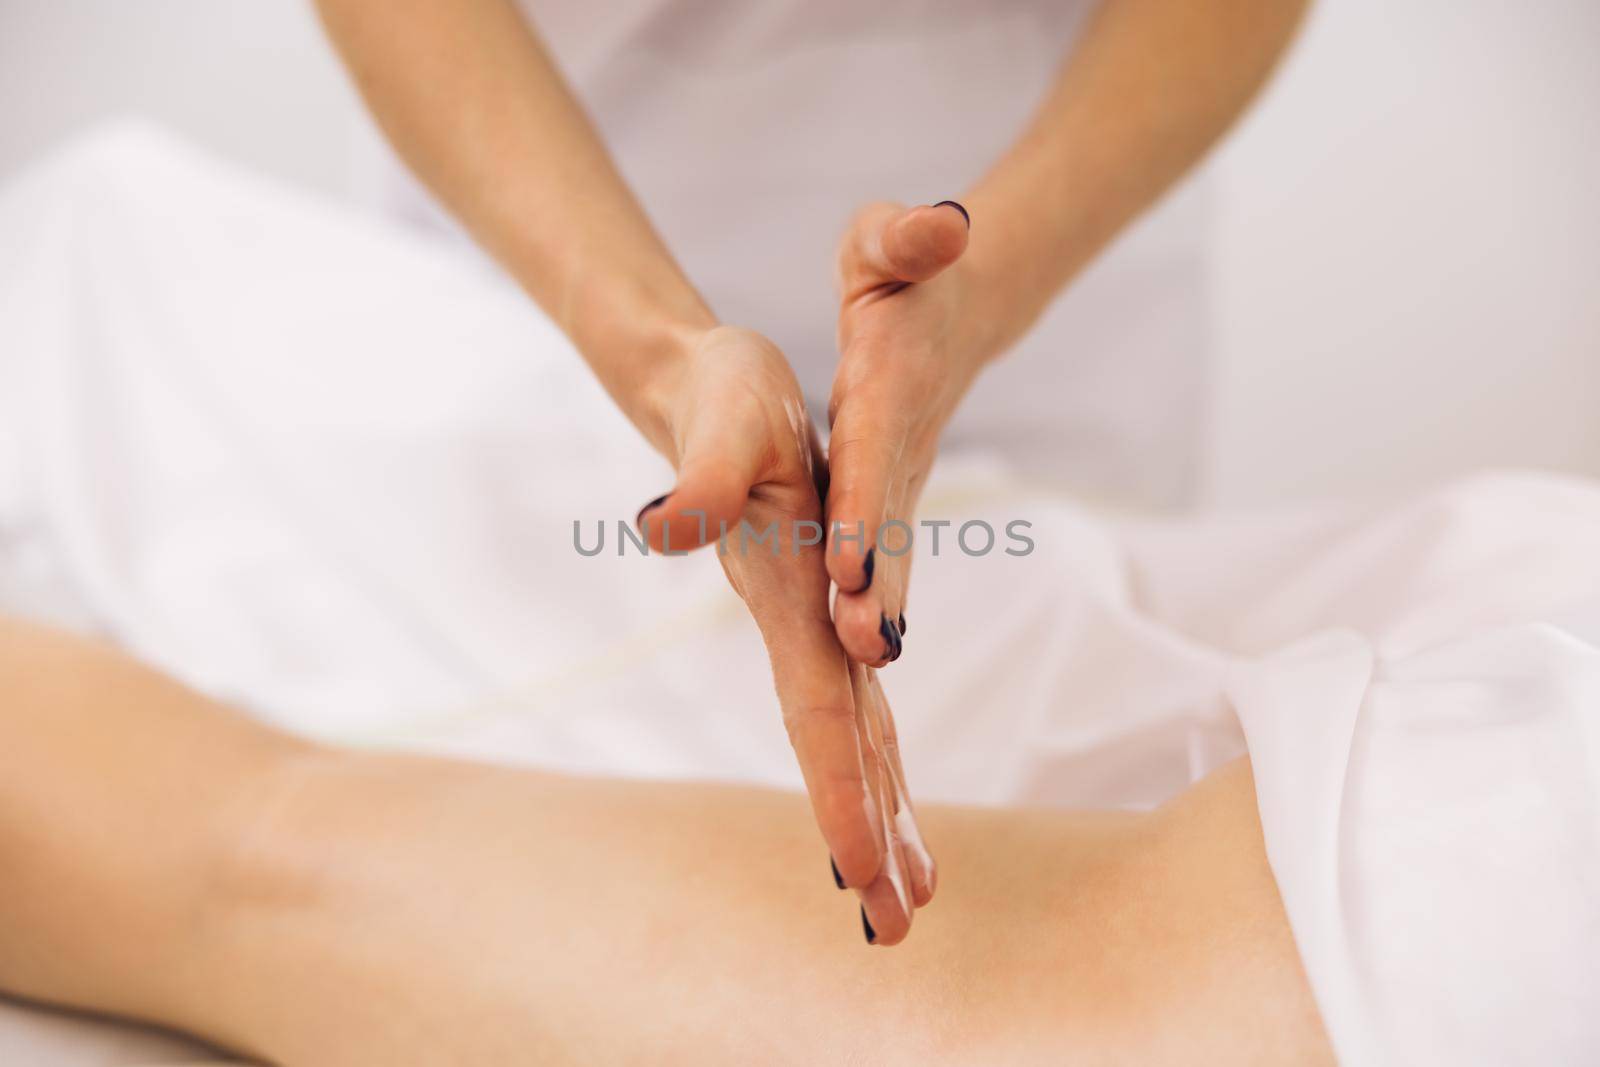 Woman receiving professional body, leg and foot massage and lymphatic drainage in health massage salon. Massage creme treatment. Anti-cellulite massage of hips.